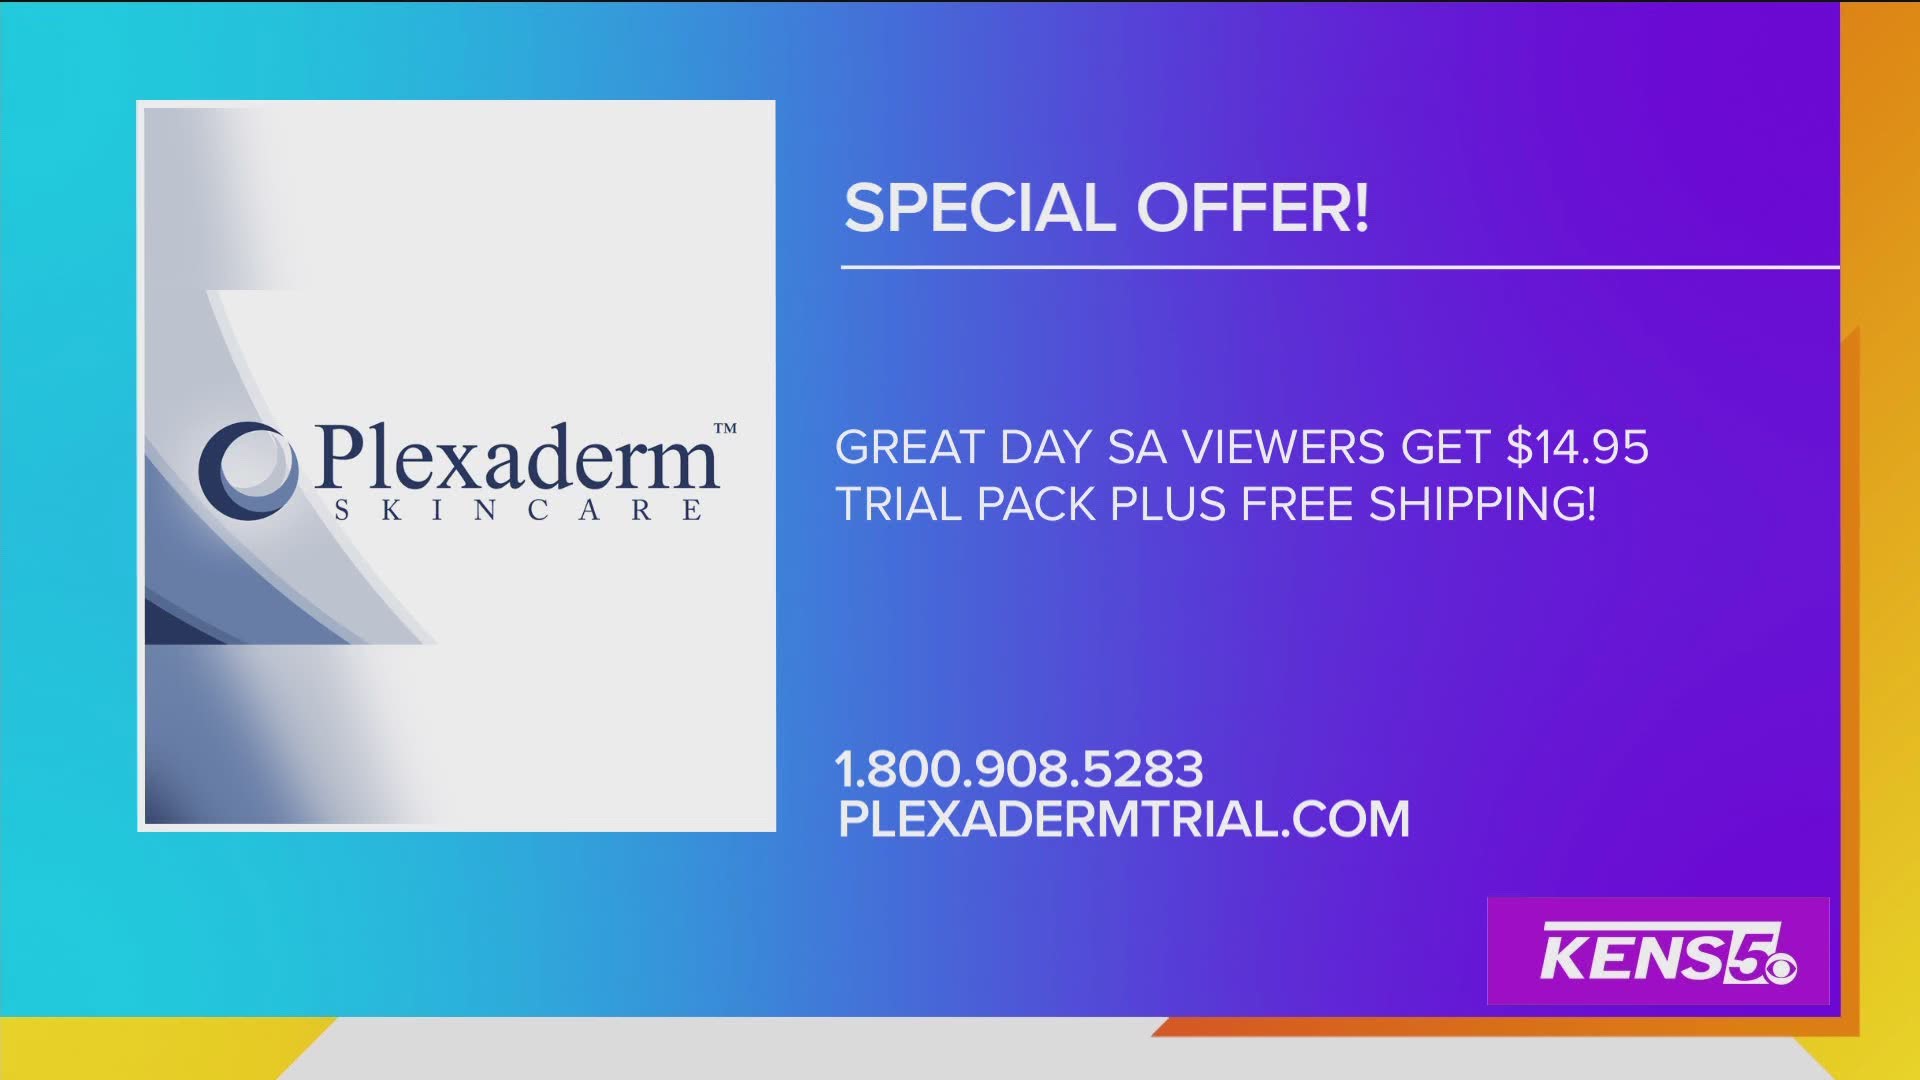 Plexaderm is offering a trial pack right now for just $14.95!